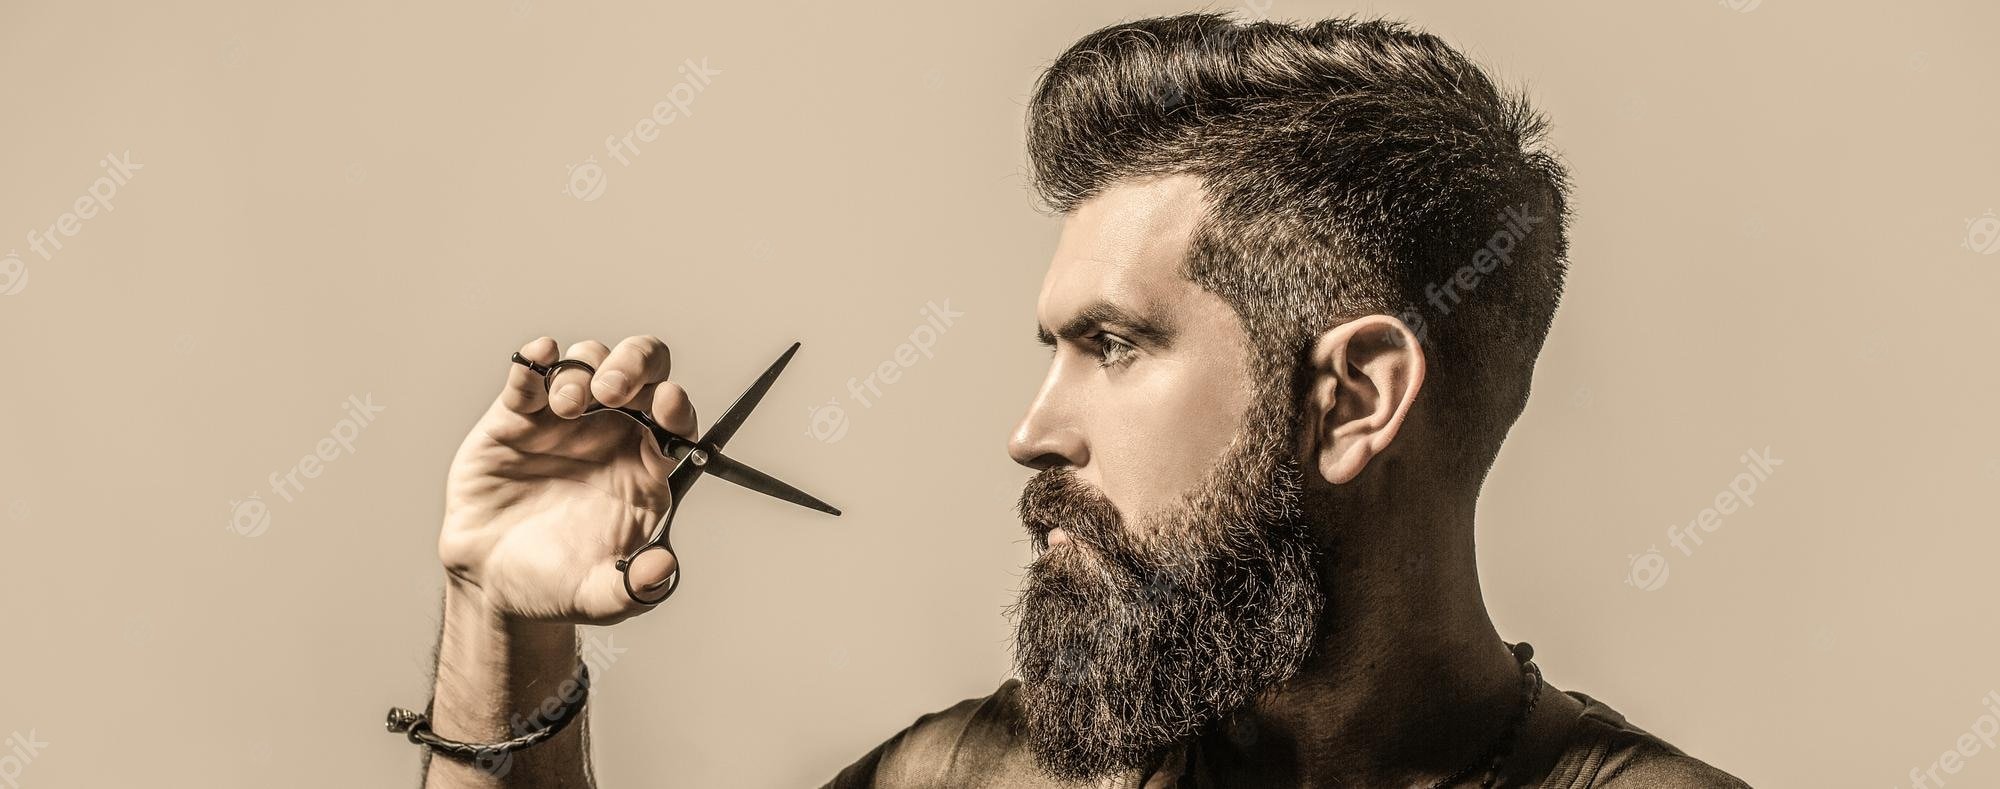 Barber Haircut Picture